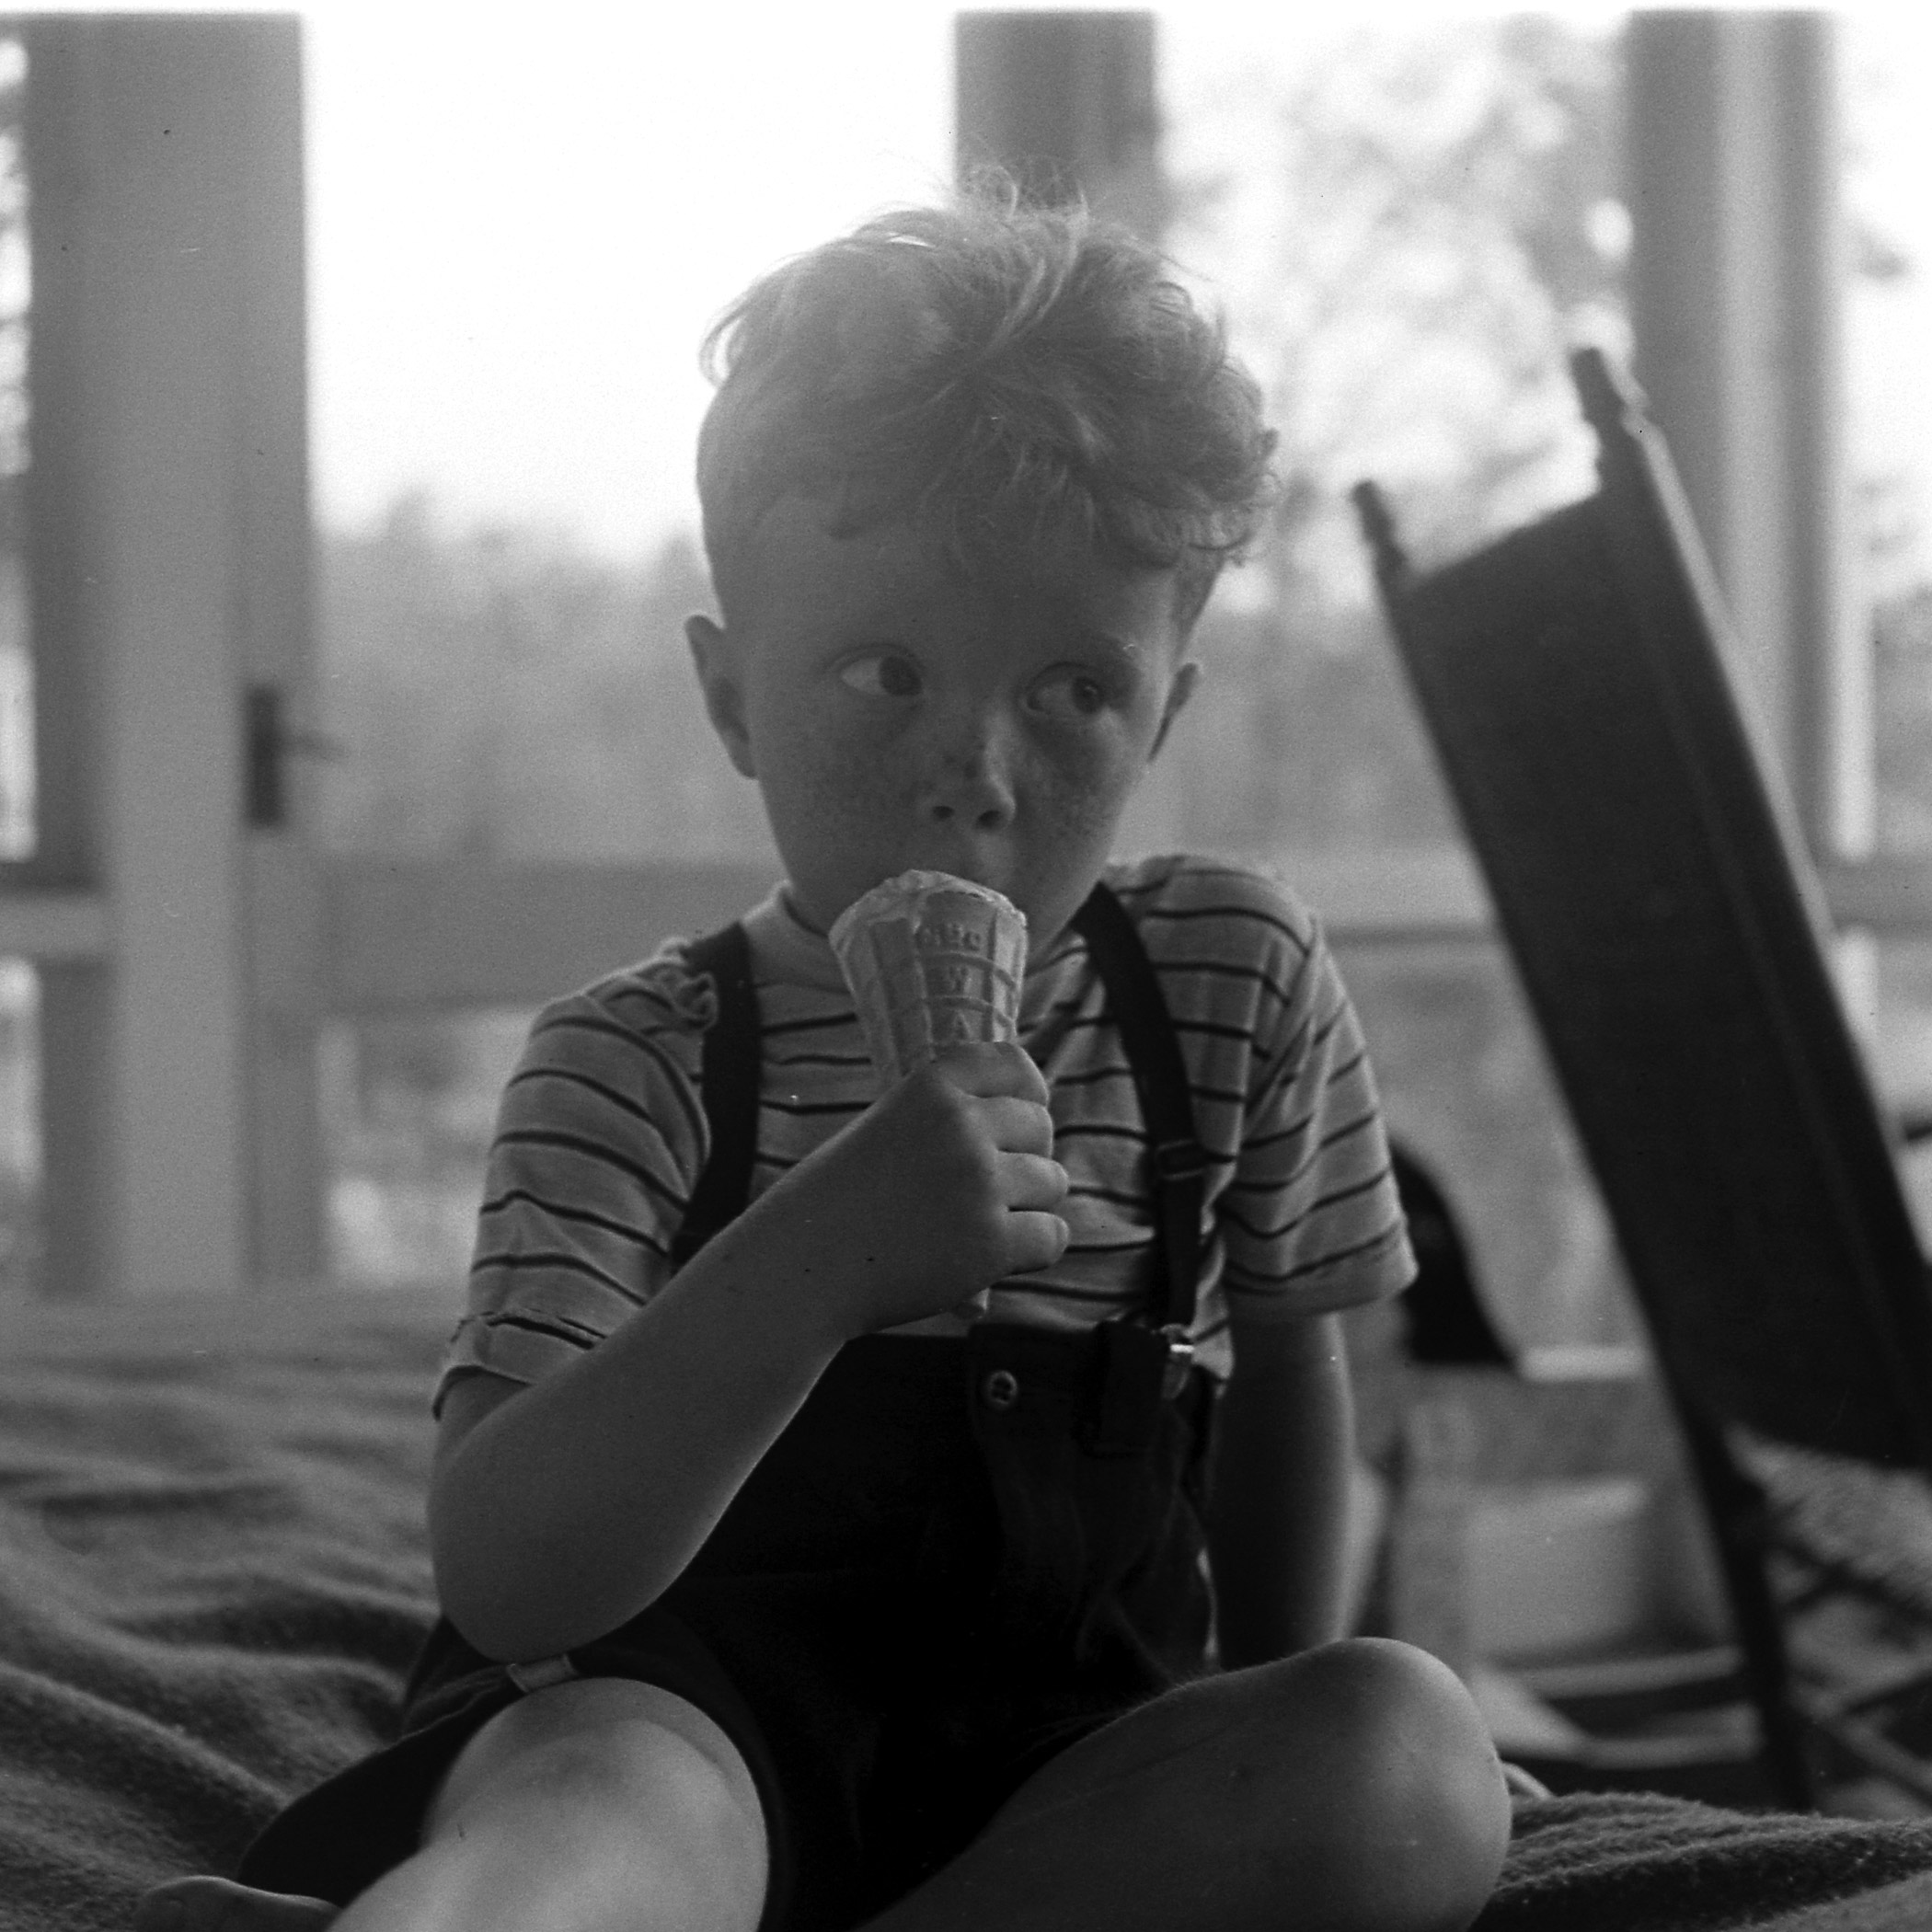 Little boy eating ice cream on the screened-in porch in Cape Cod, 1946.